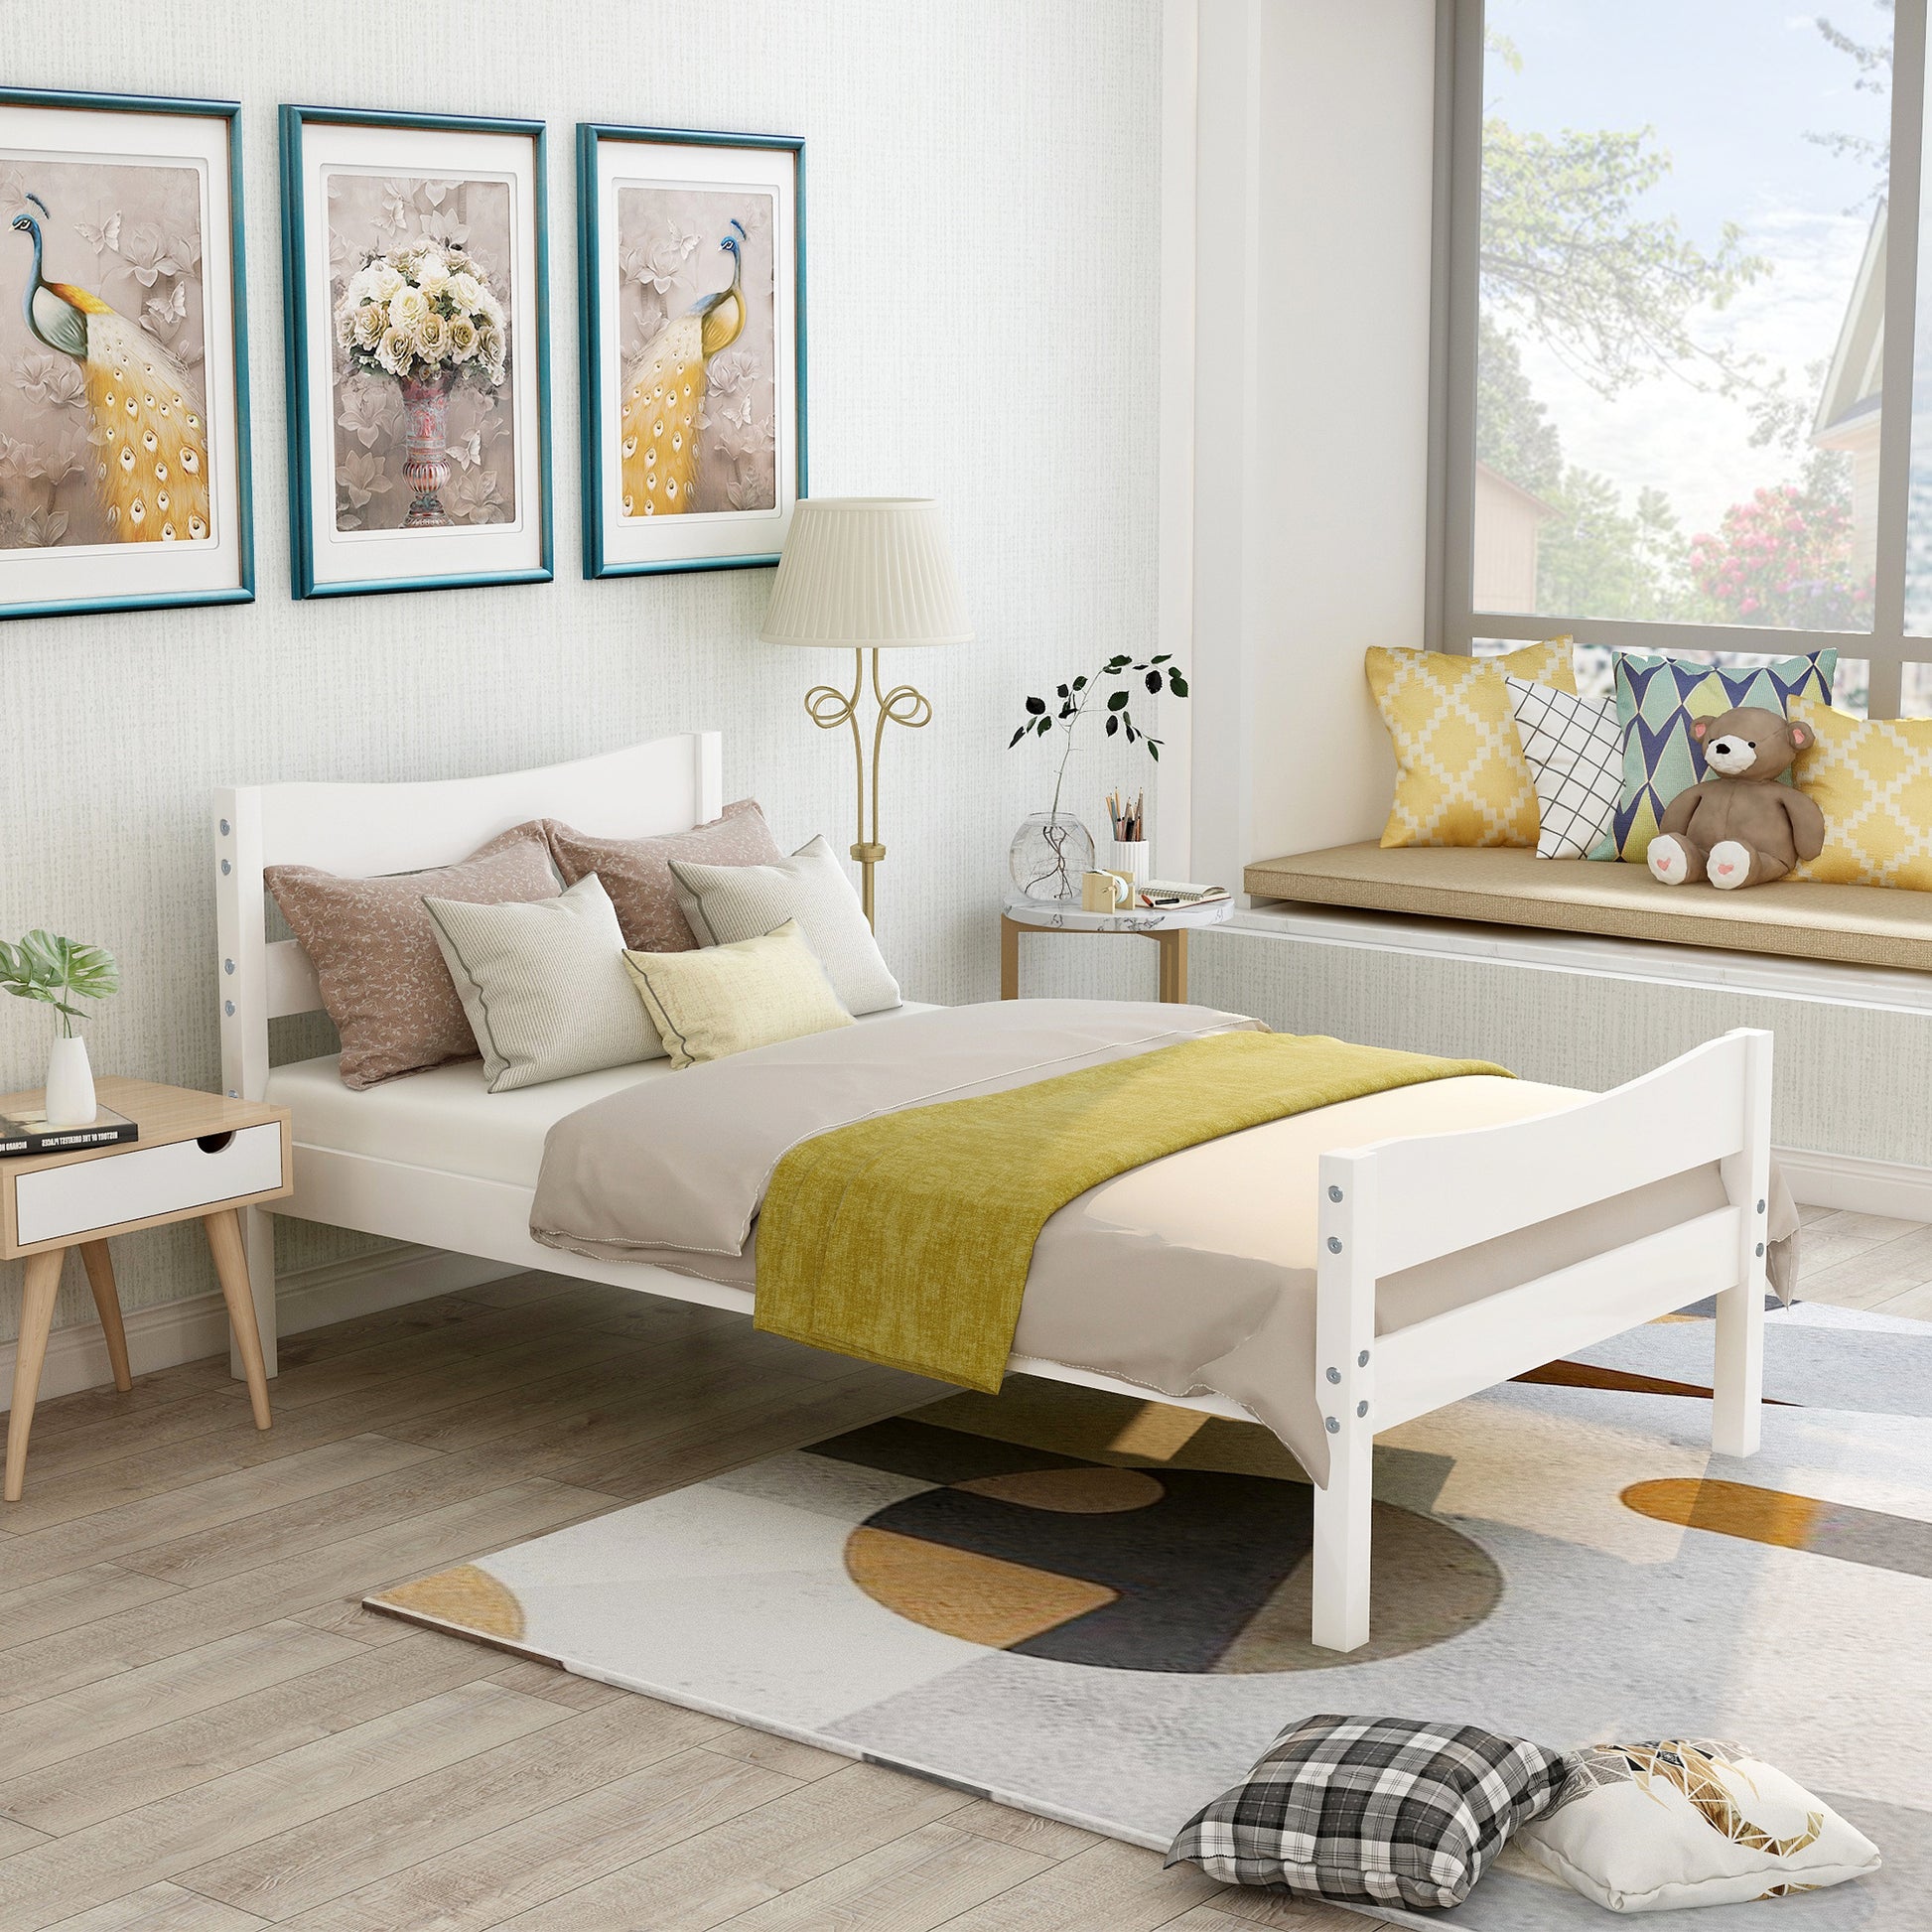 Traditional Twin Size Wooden Platform Bed in White